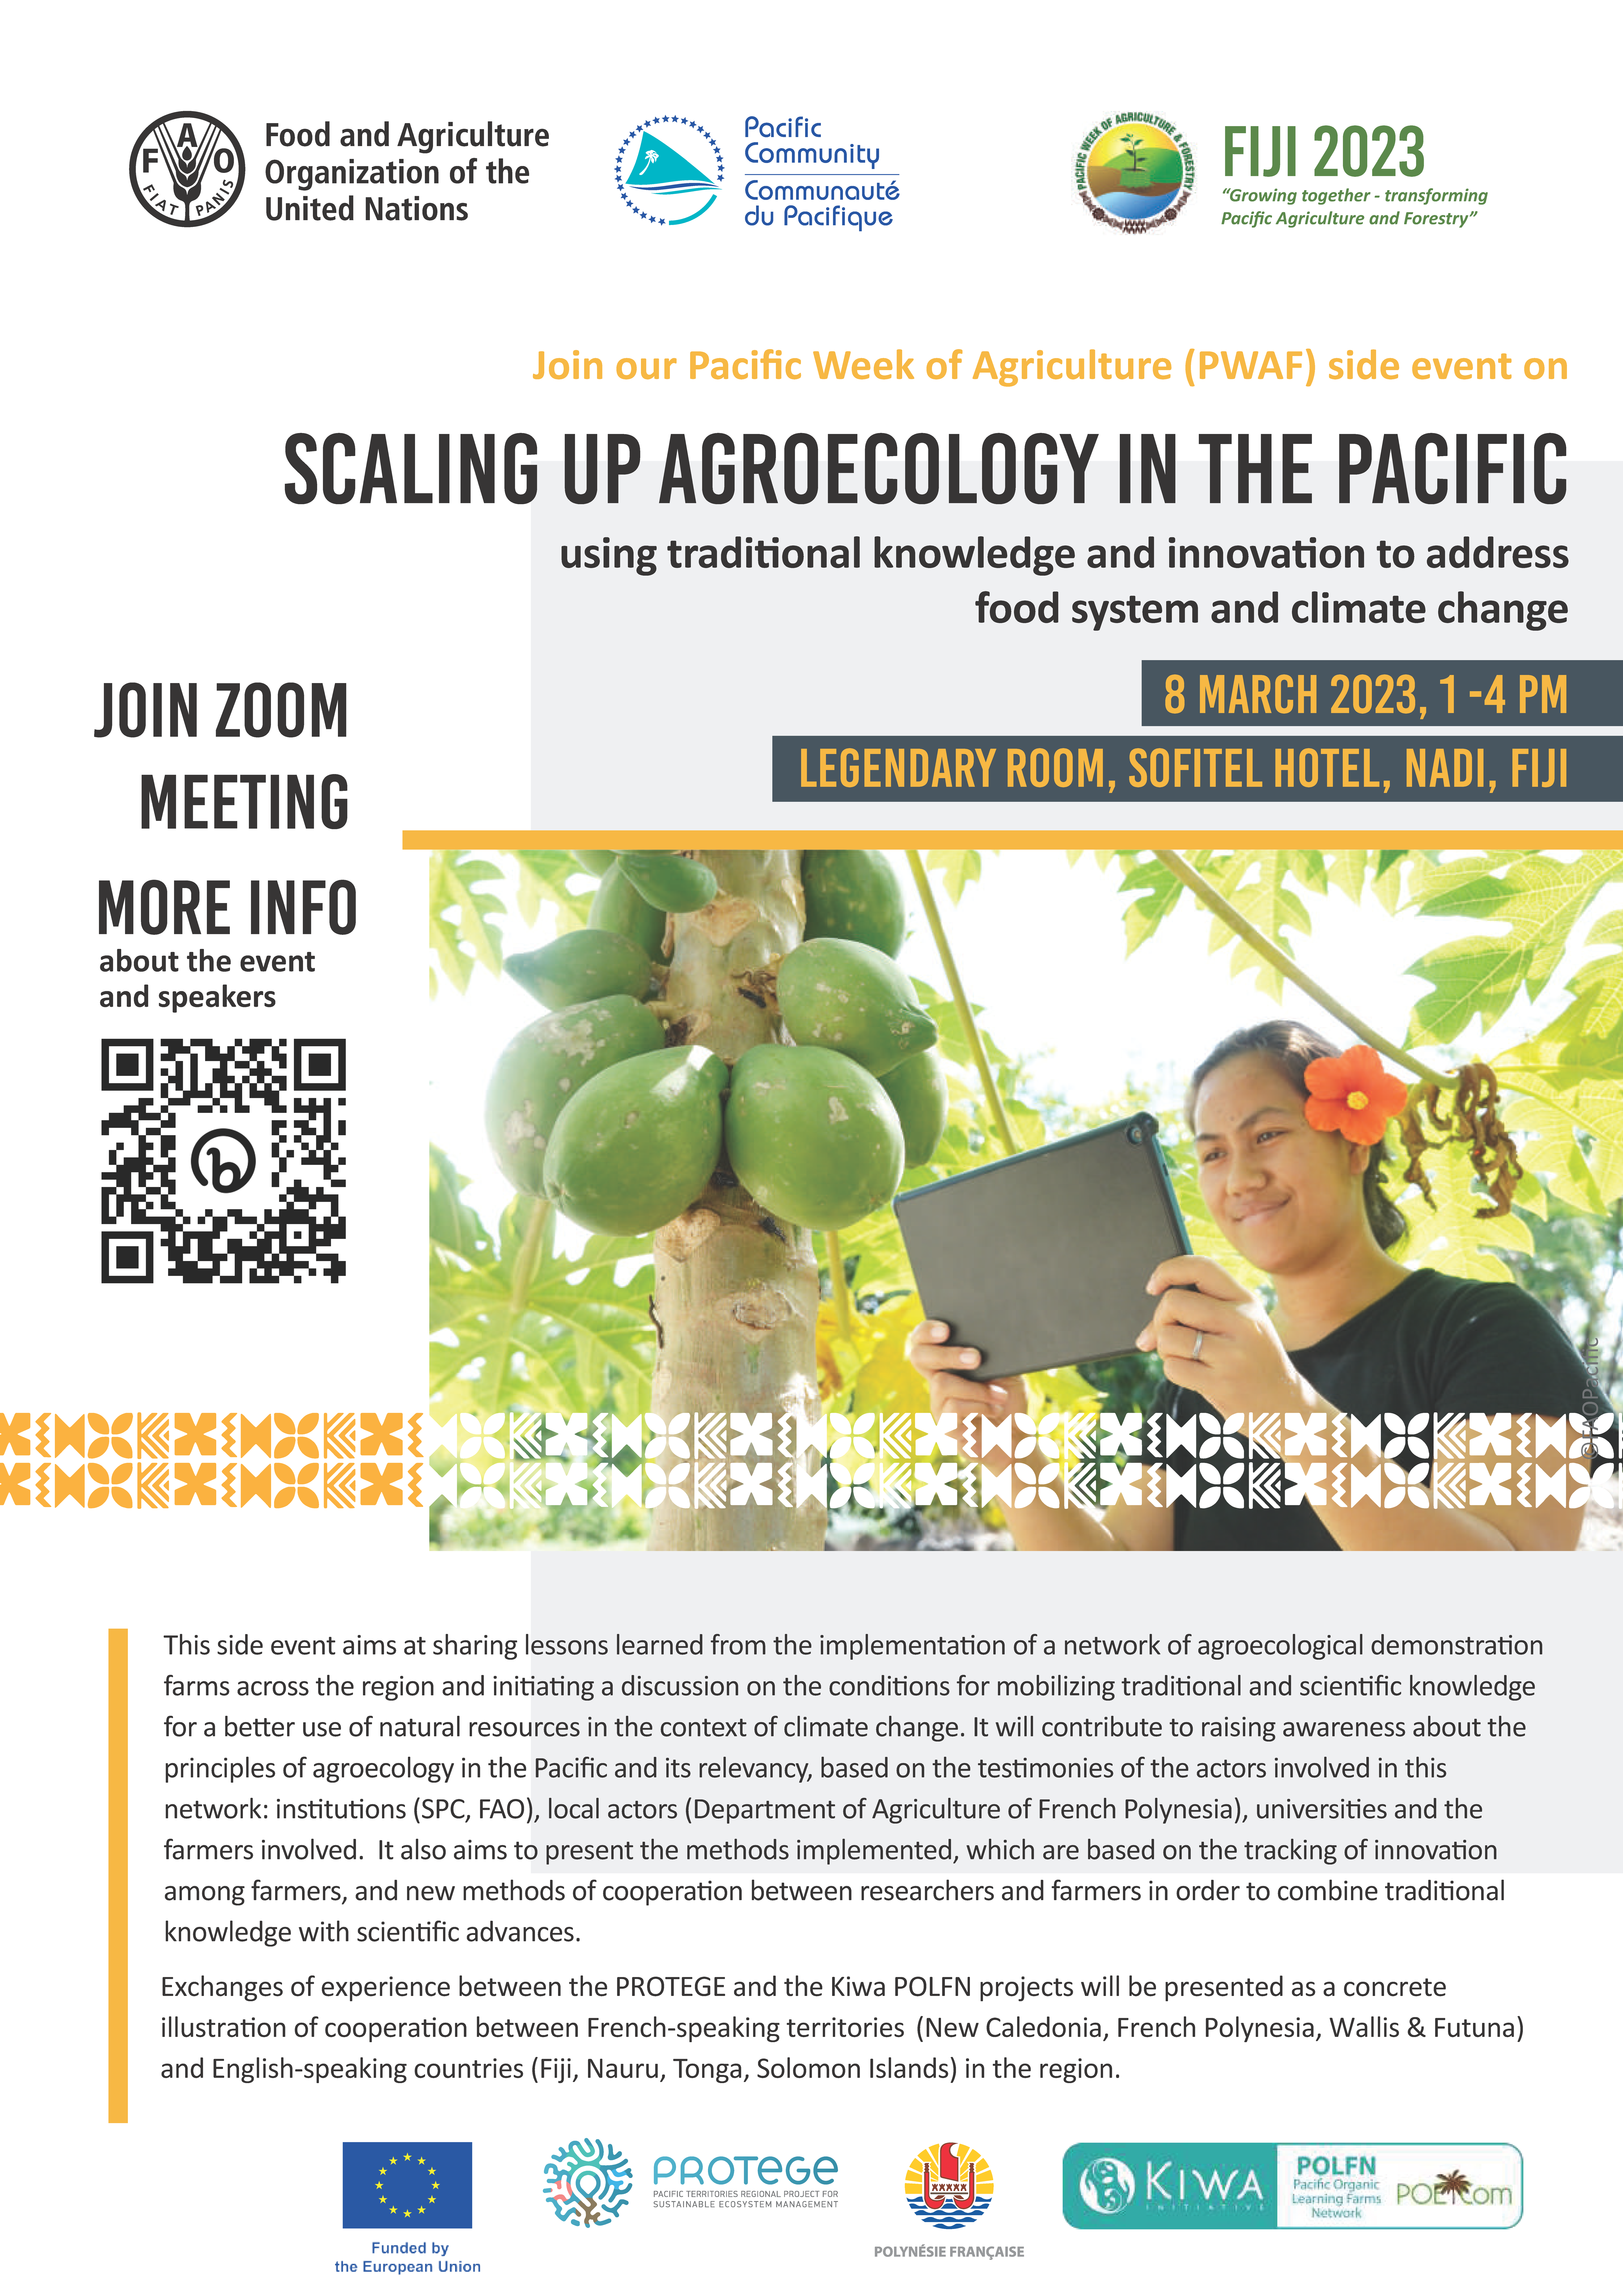 Pacific Week of Agriculture (PWAF) side event - PROTEGE - FAO - SPC